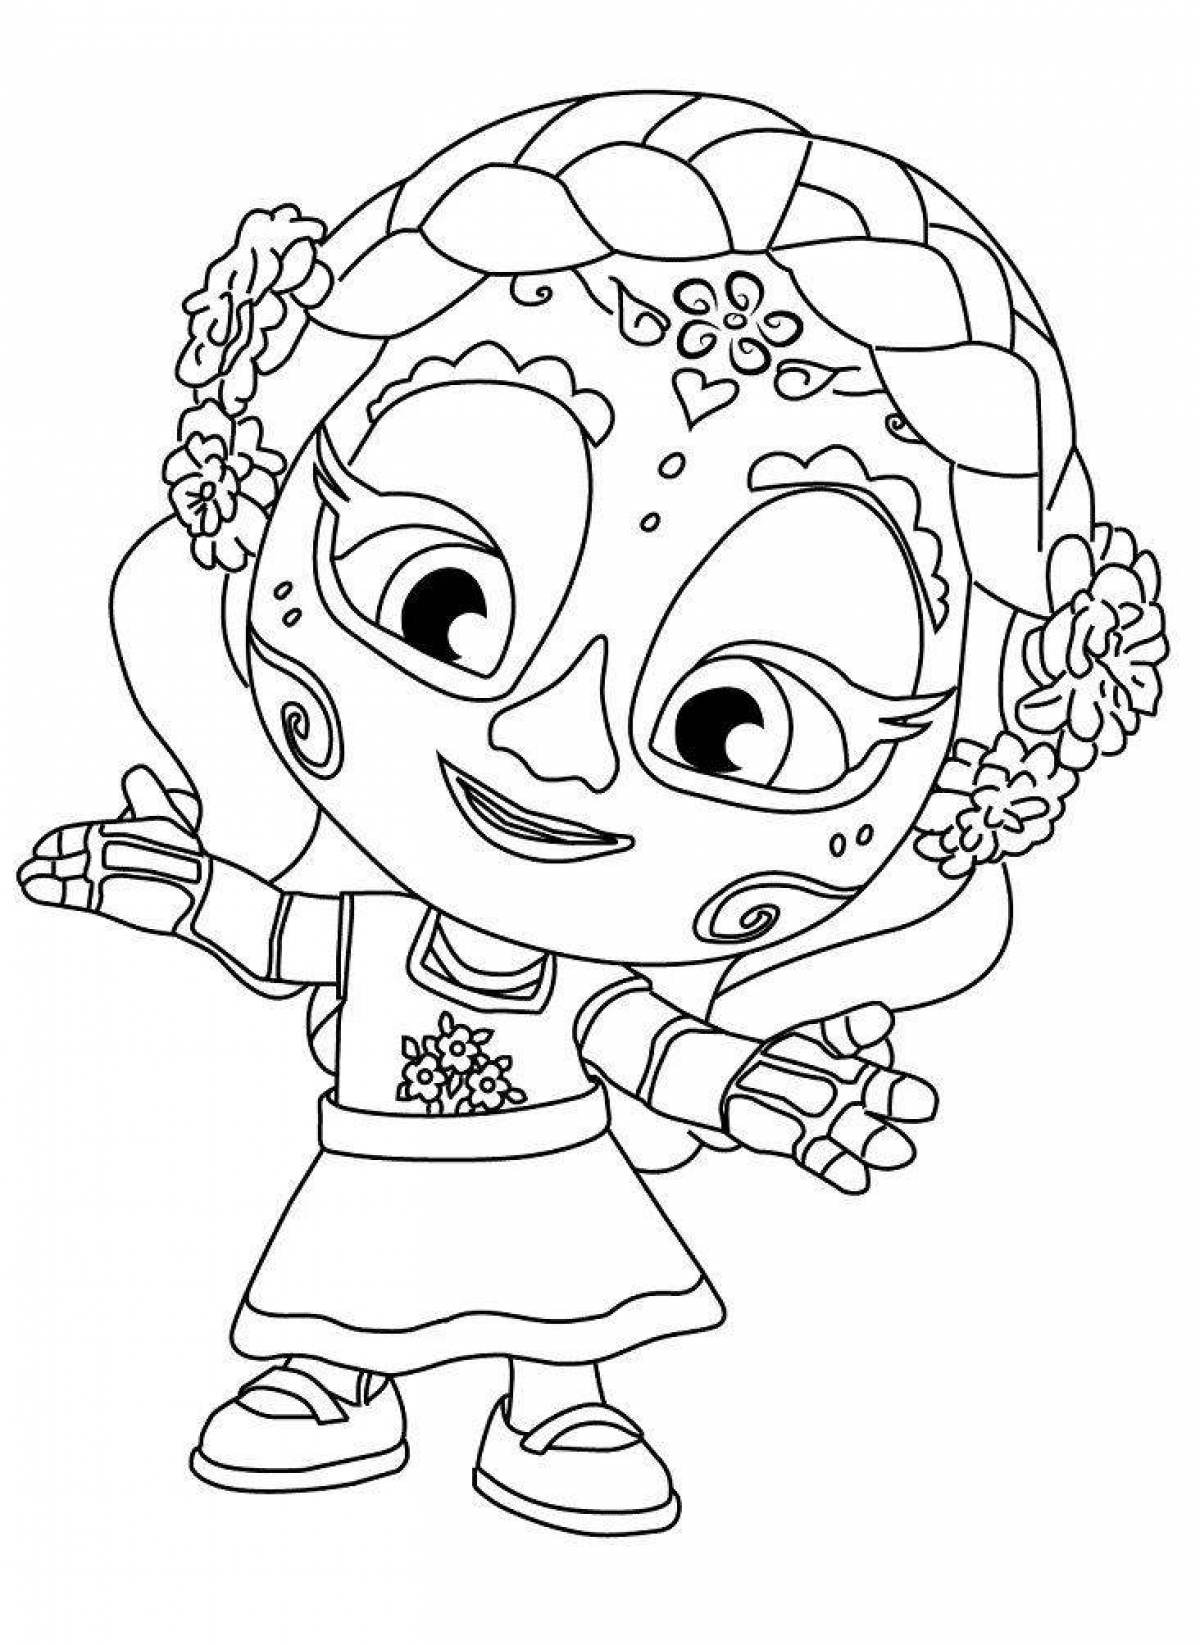 Amazing super monster coloring pages